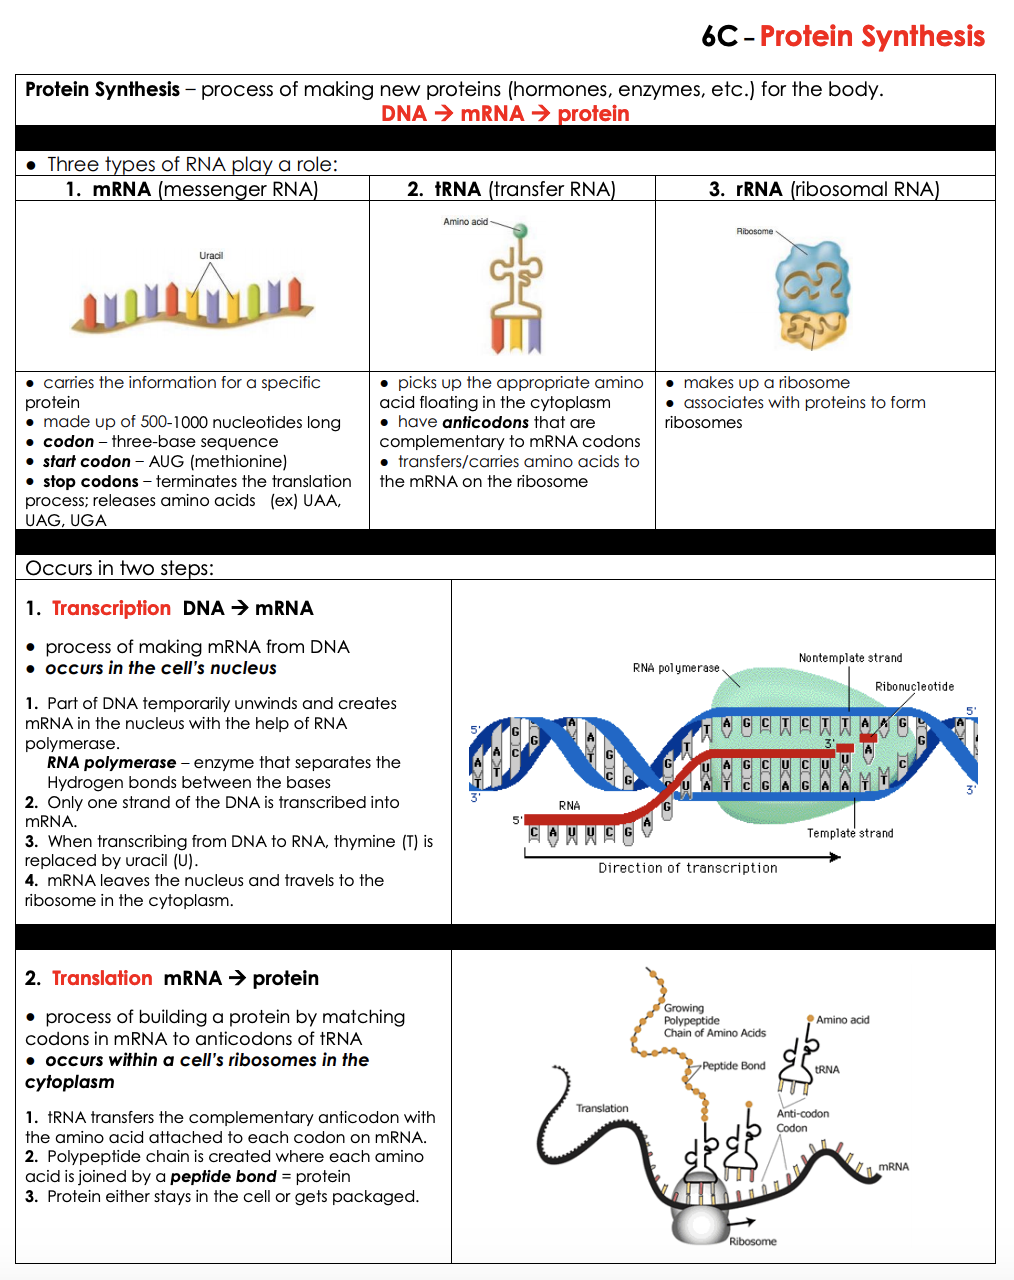 Protein Synthesis - LPHS BIOLOGY STAAR REVIEW